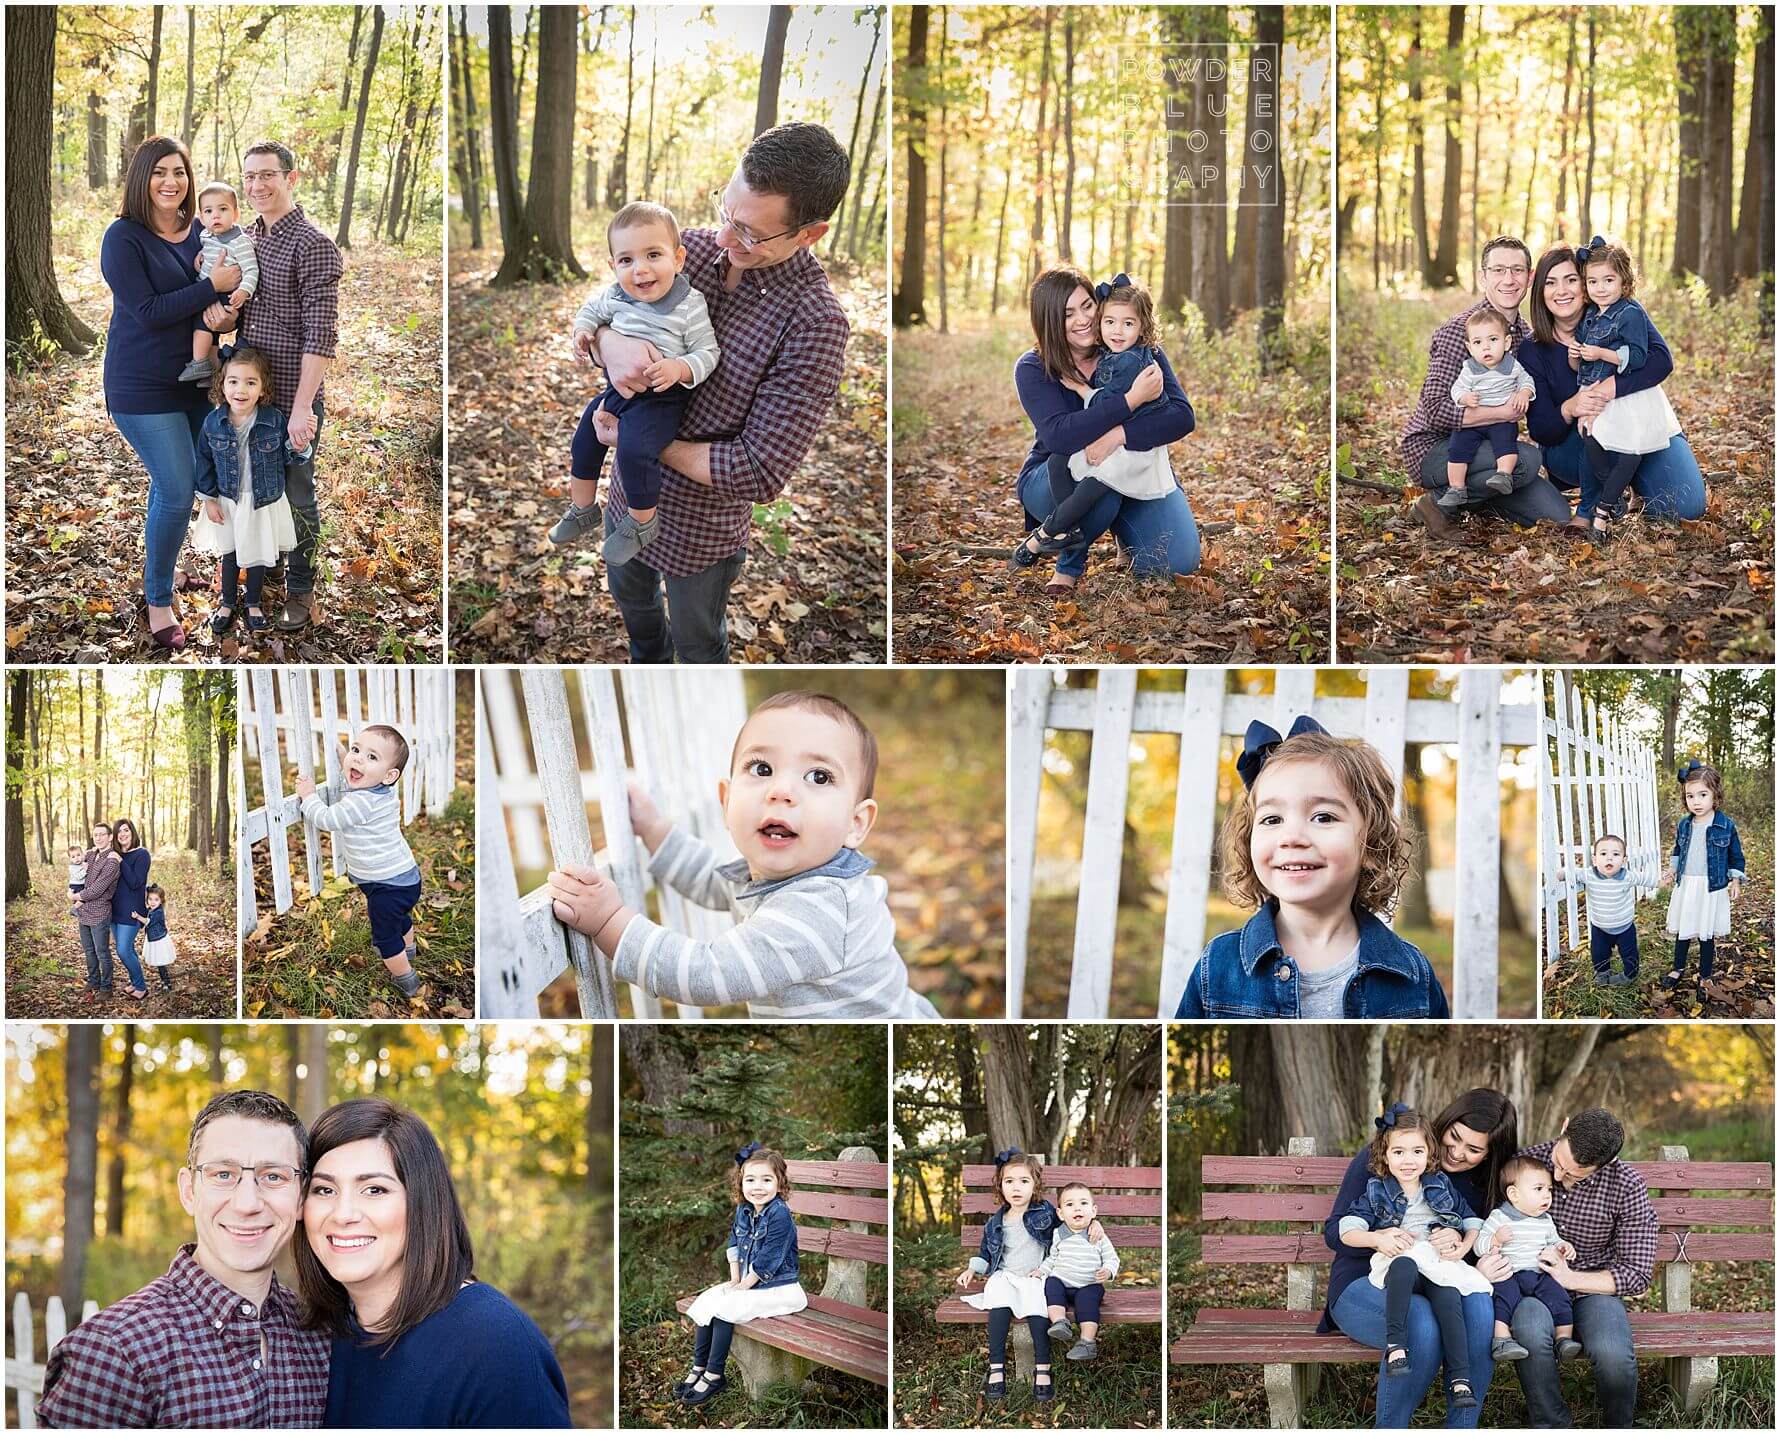 fall mini portrait session at fairview park in pittsburgh, pa. pittsburgh family photographer.